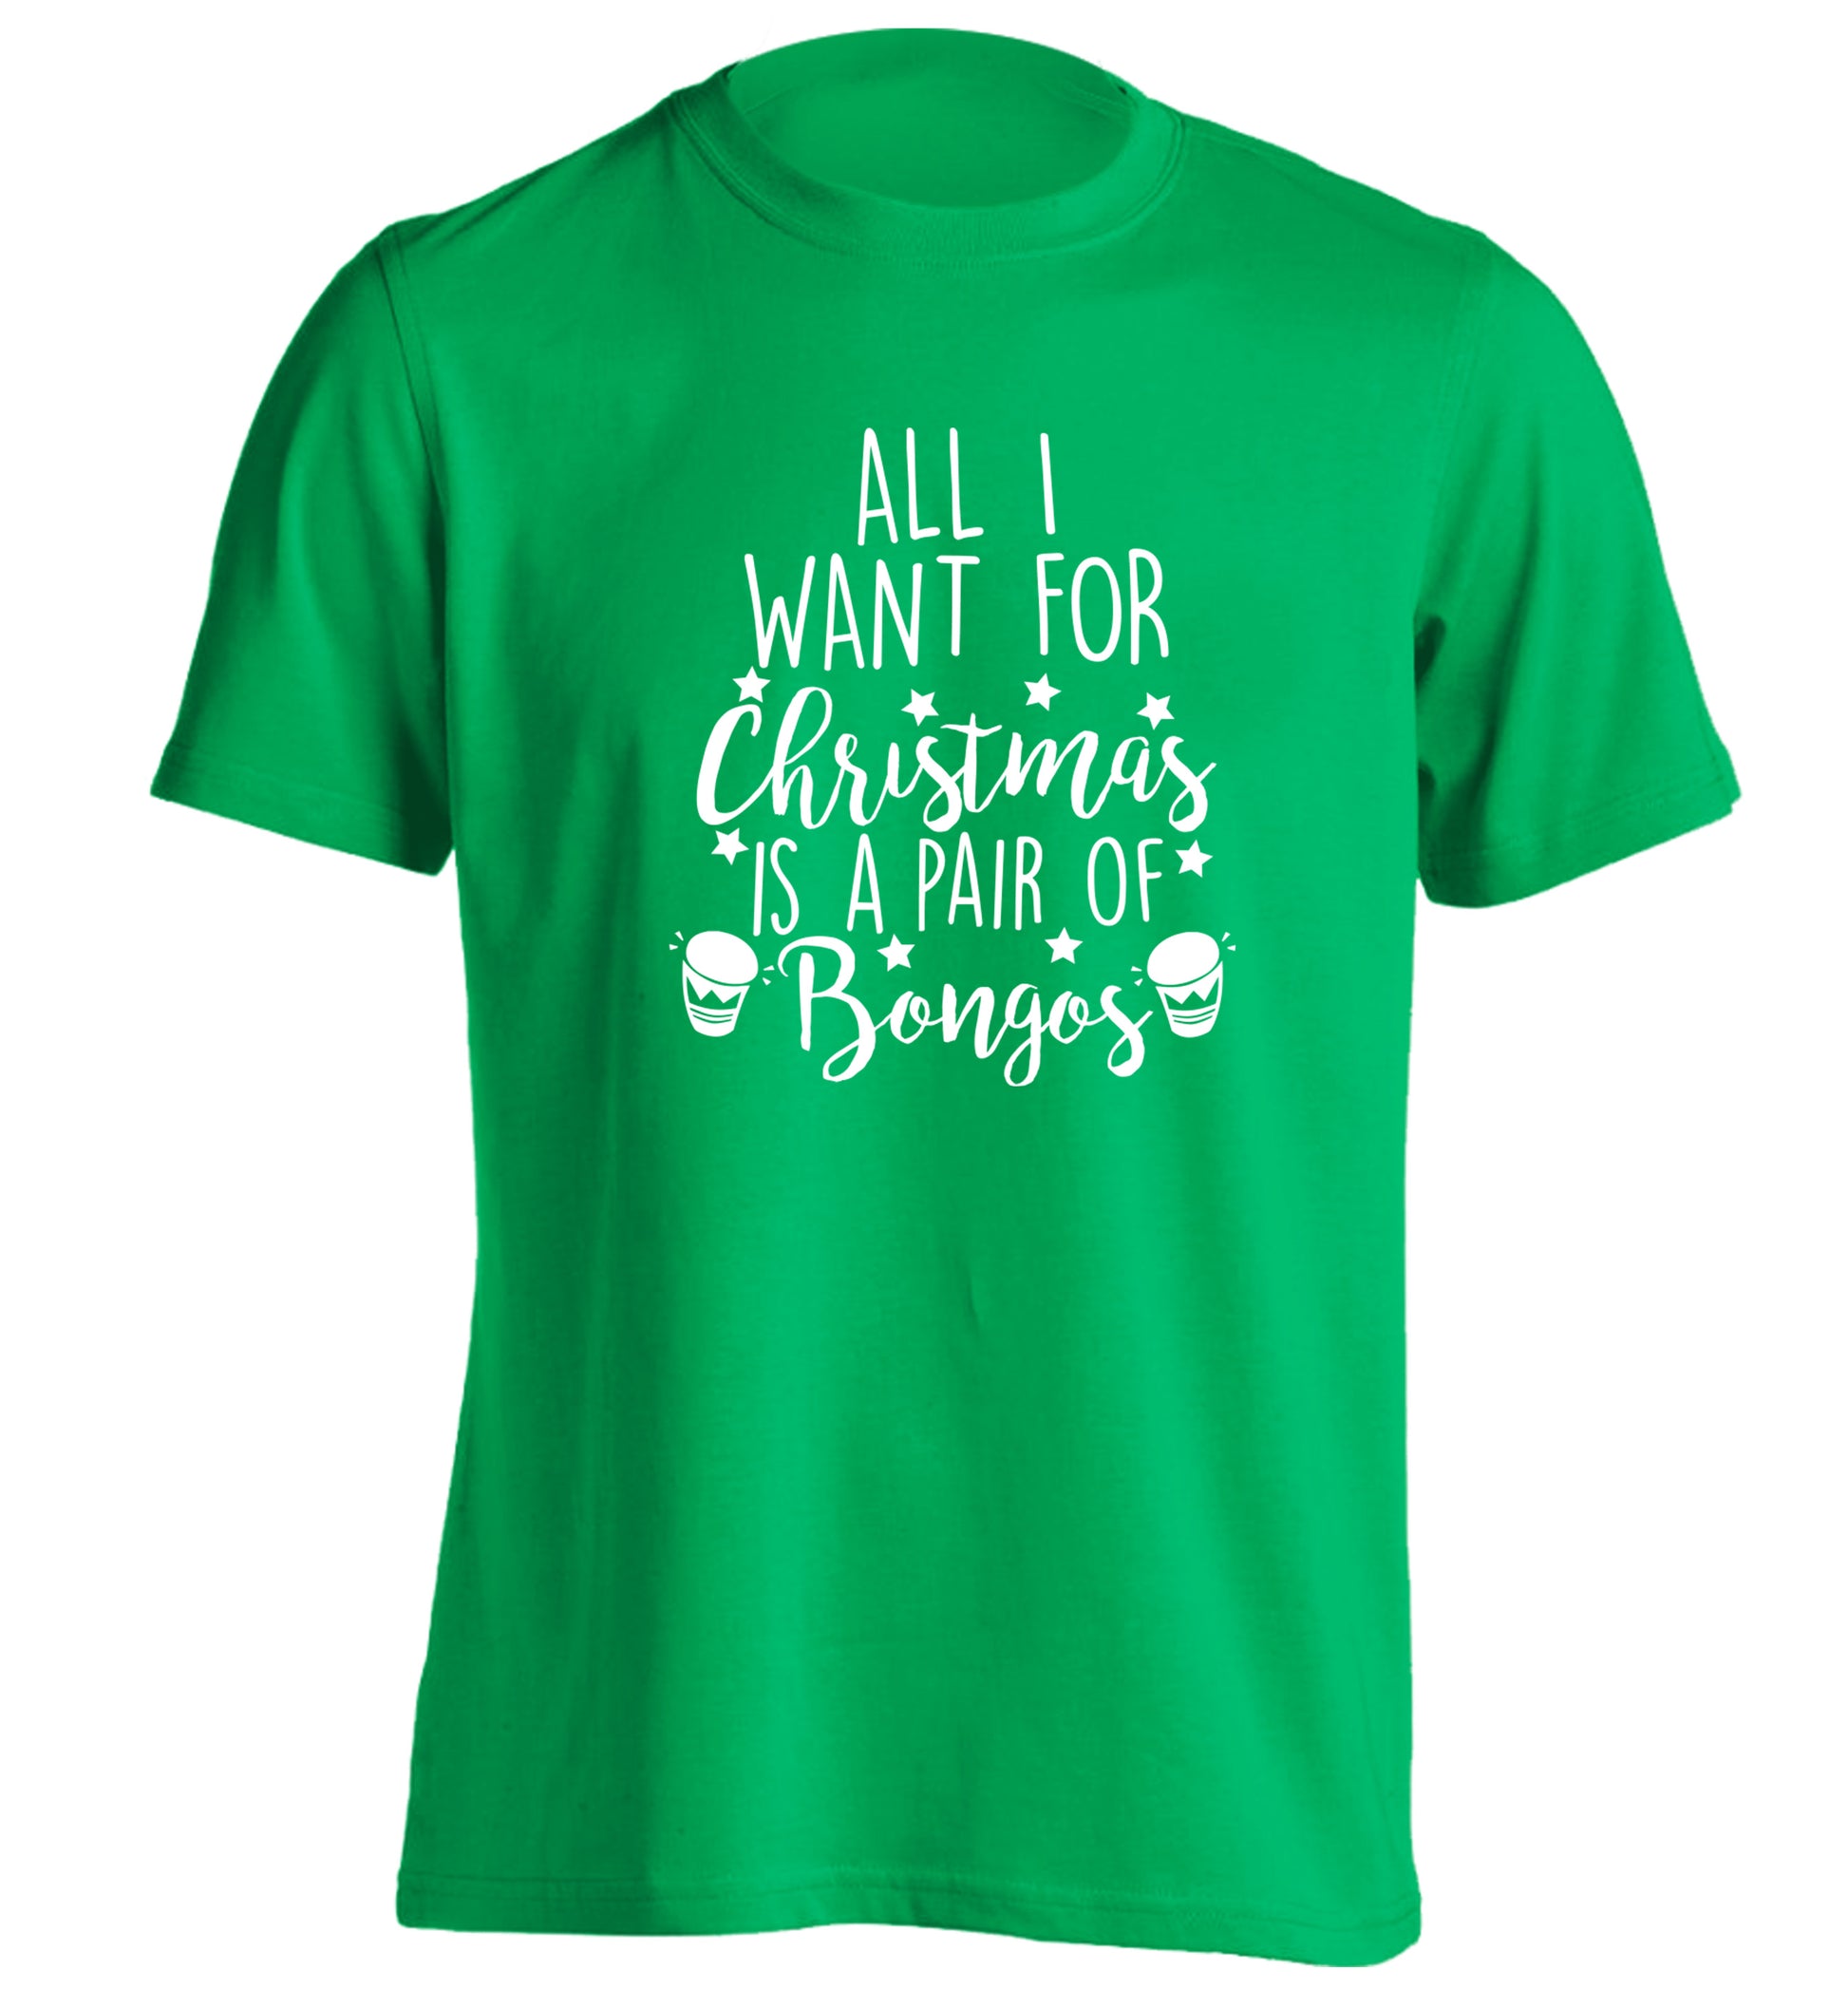 All I want for Christmas is a pair of bongos! adults unisex green Tshirt 2XL